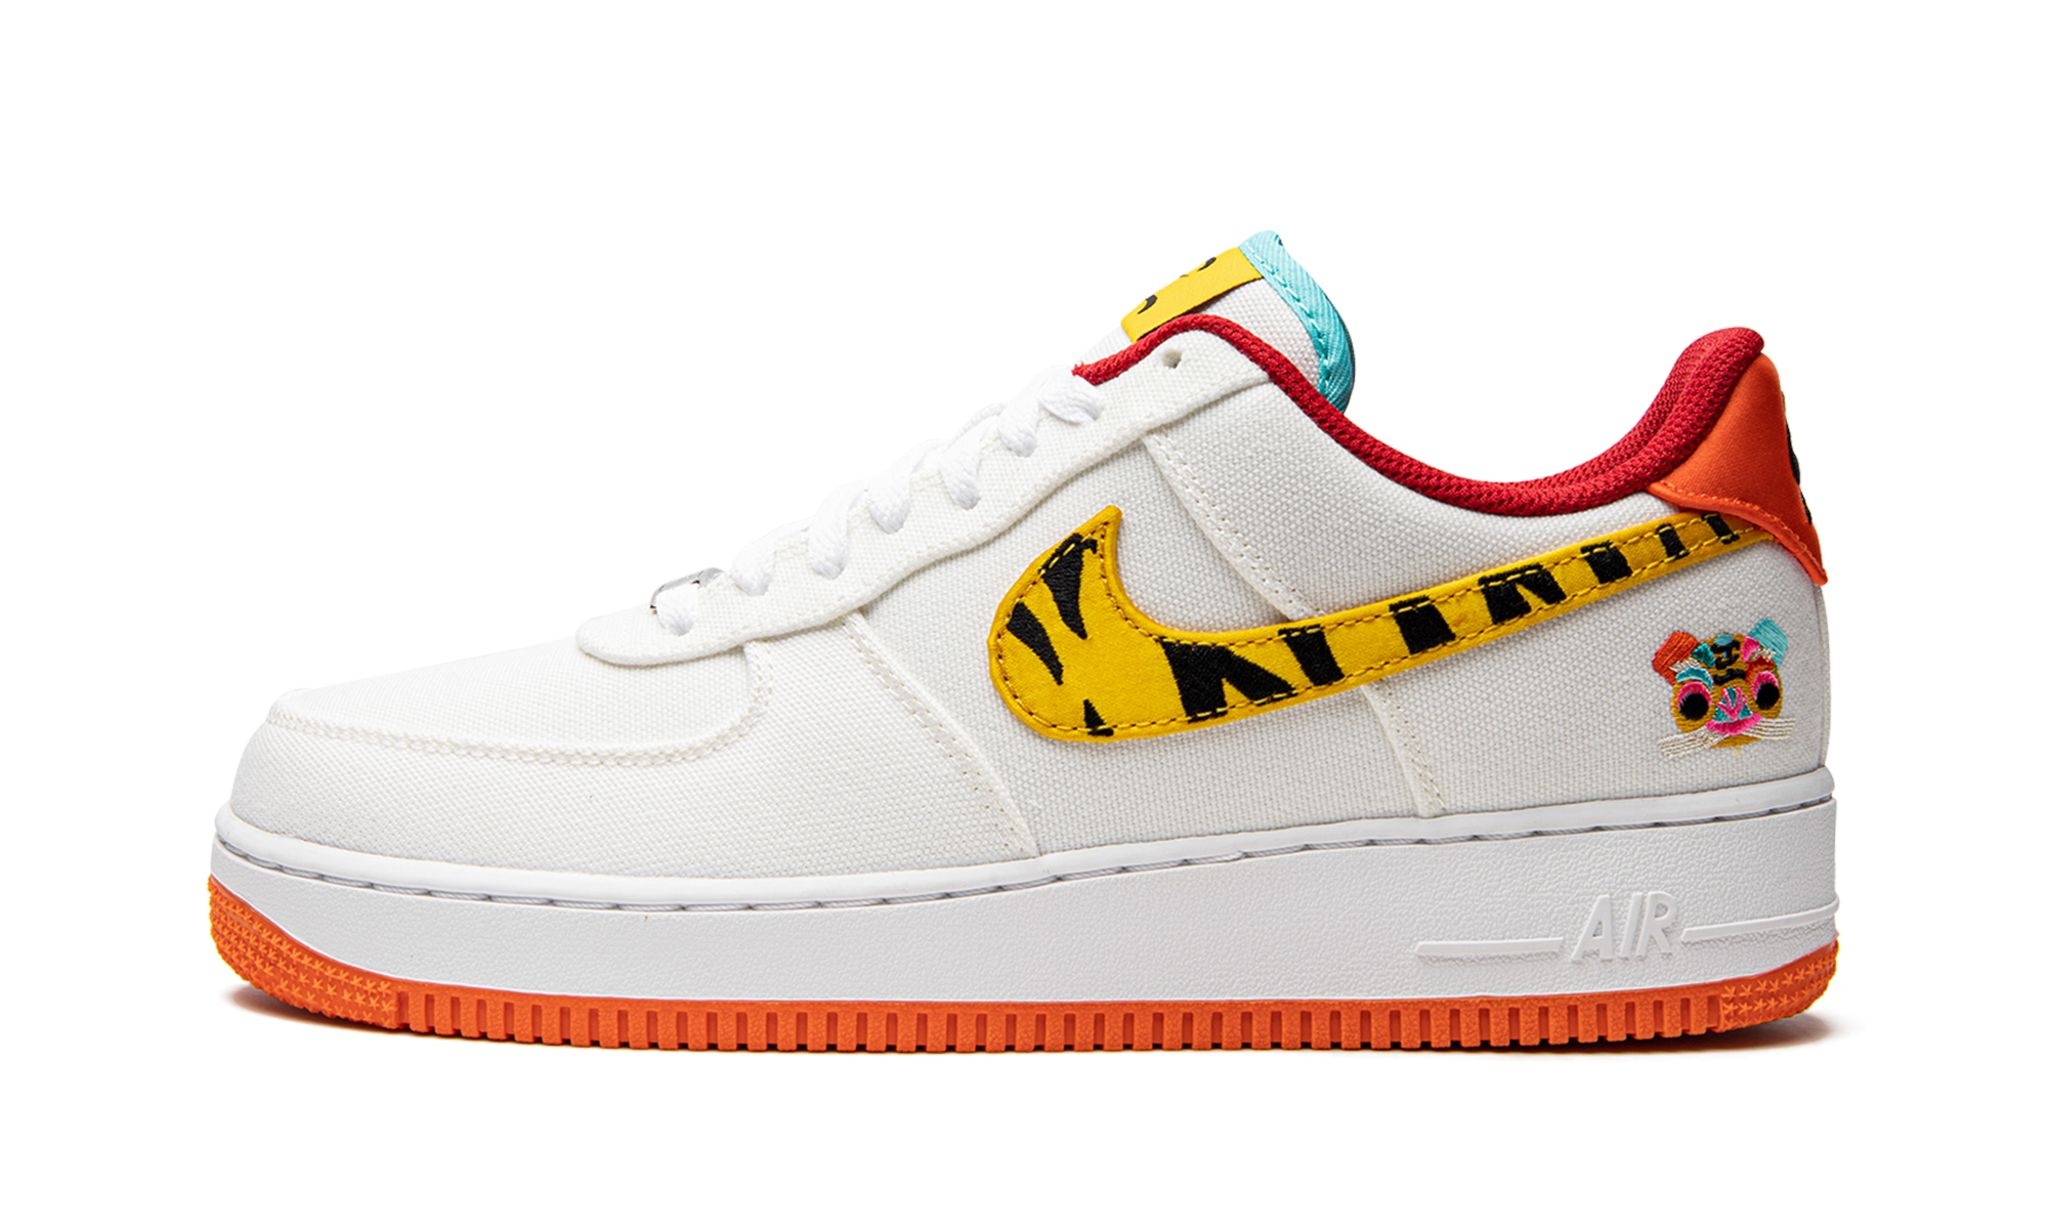 Air Force 1 Low '07 LX "Year of the Tiger" - 1